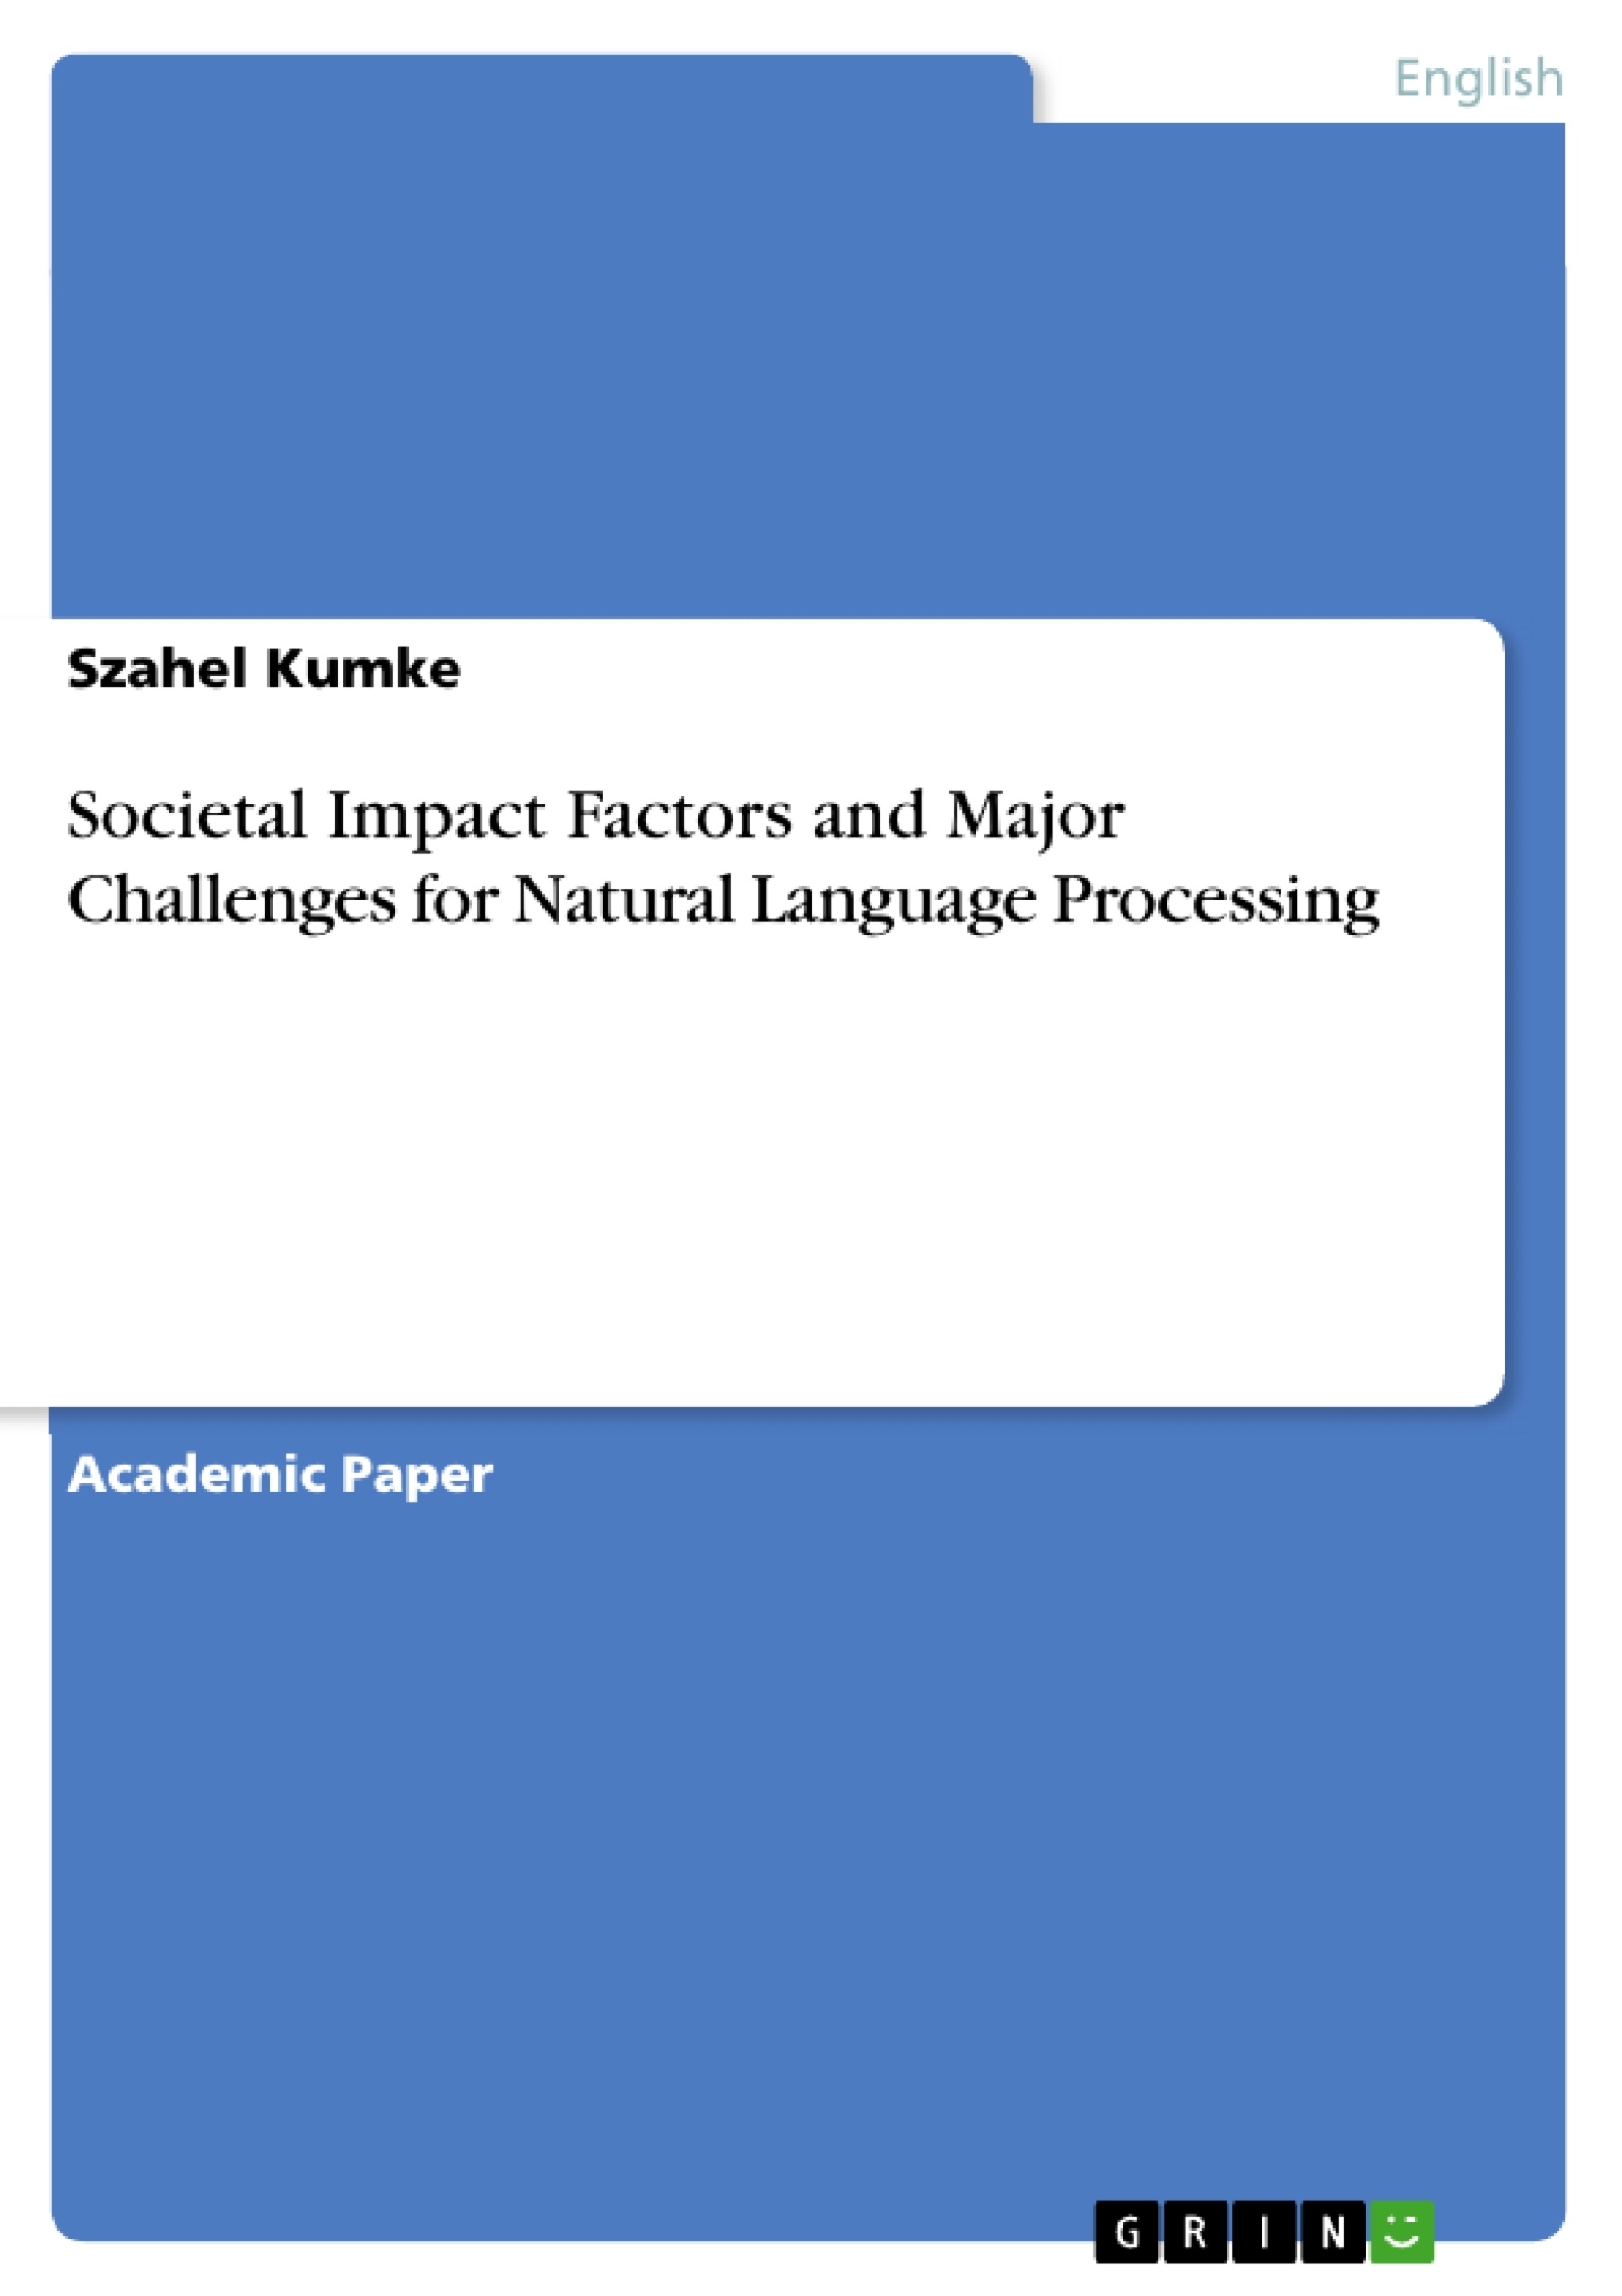 Processing　Major　Natural　Language　and　Societal　GRIN　Challenges　Impact　Factors　for